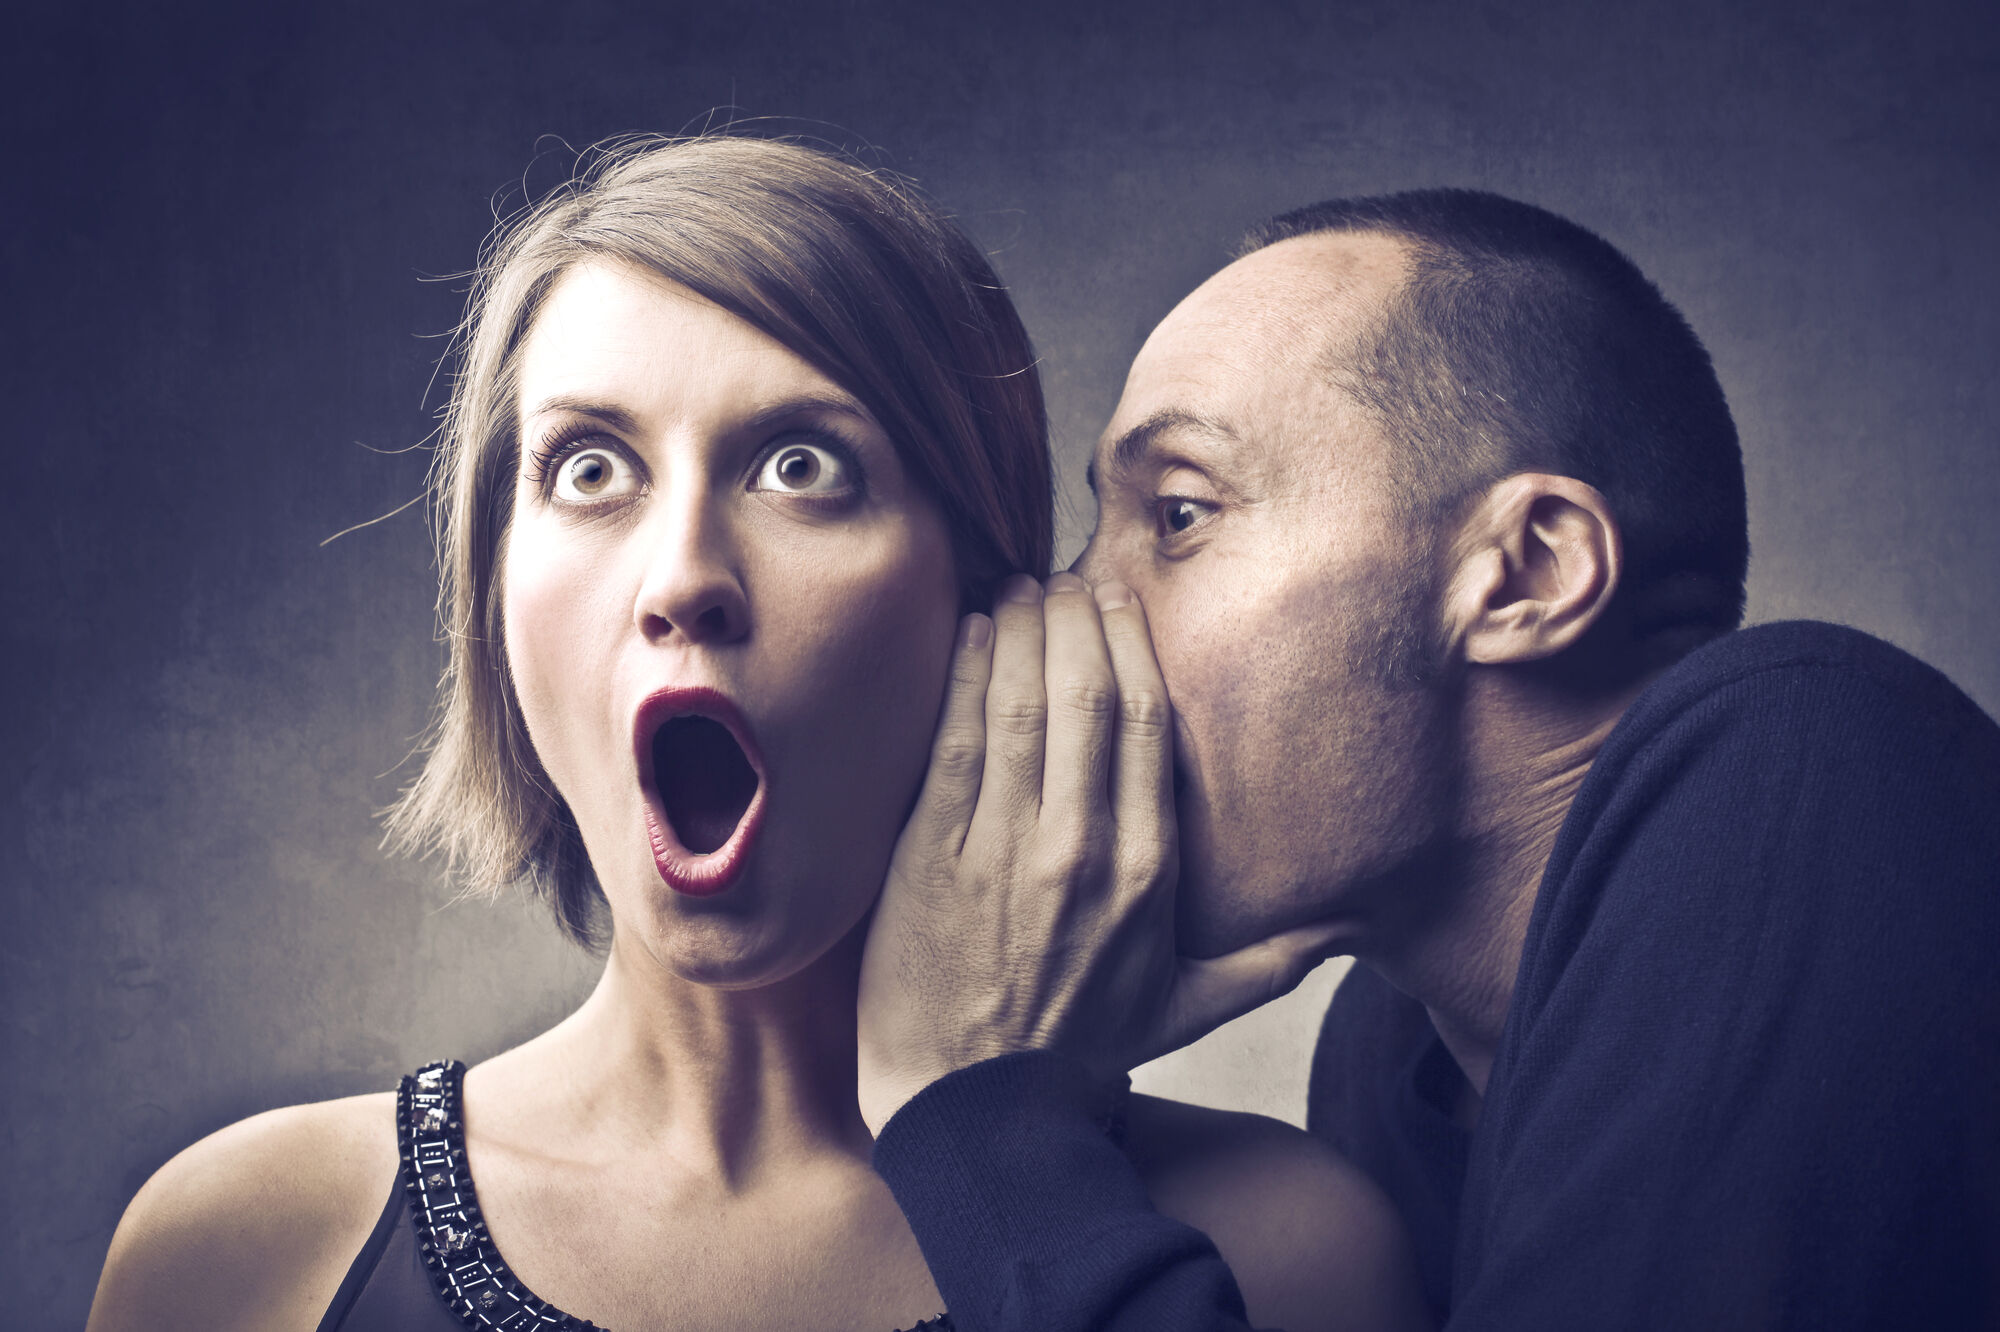 Man whispering a secret to surprised woman, her eyes wide and mouth open in shock